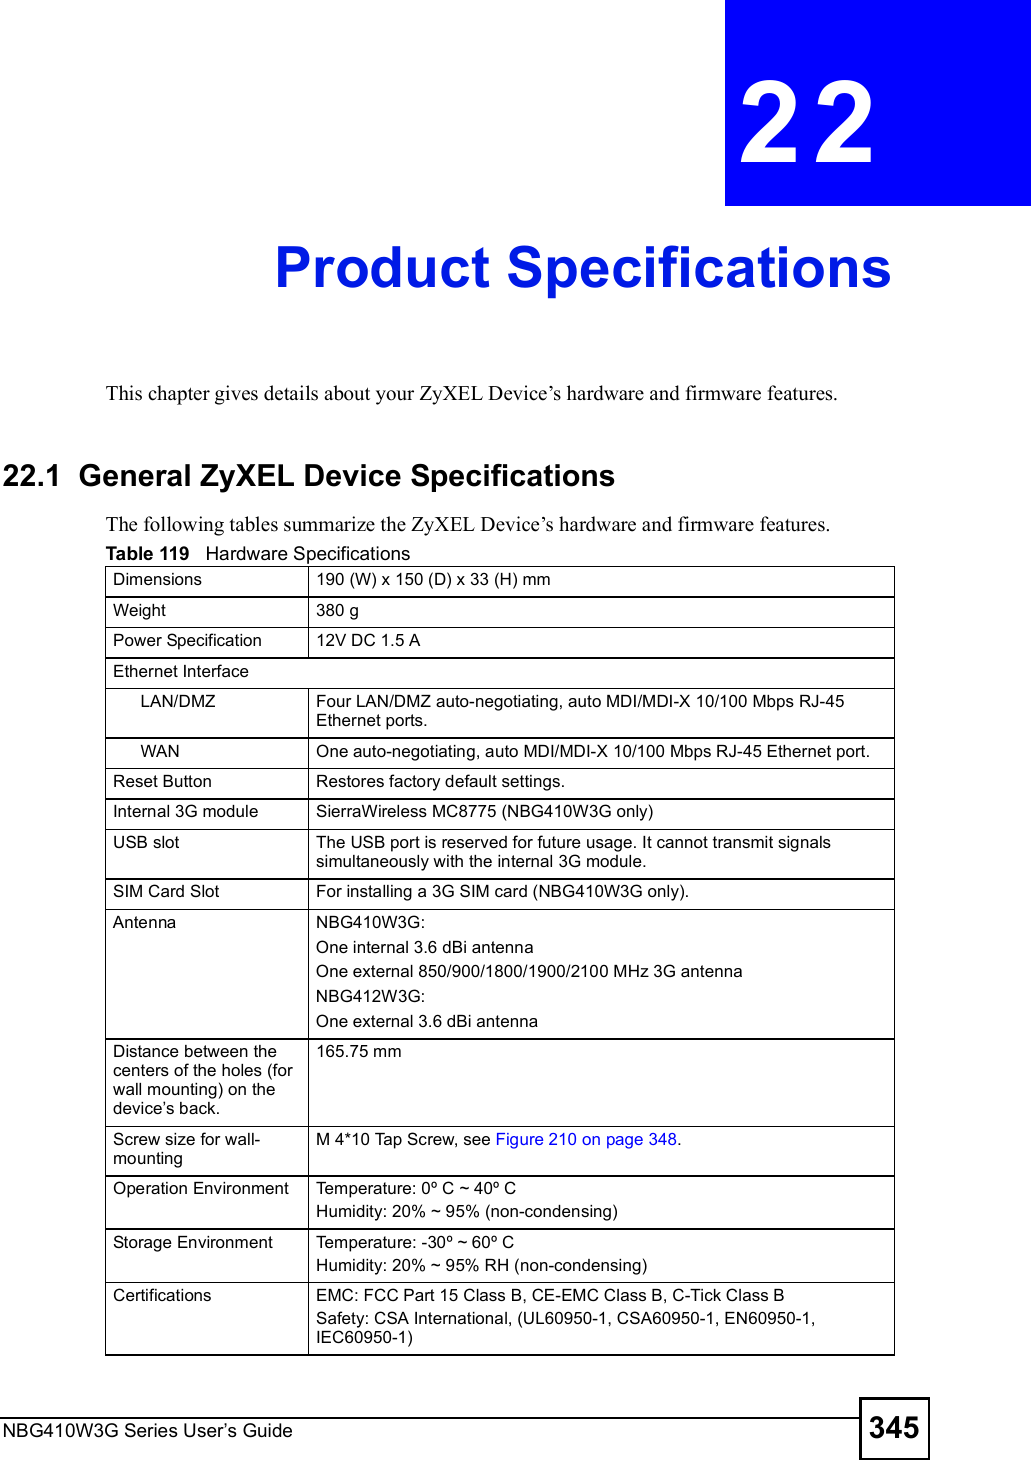 NBG410W3G Series User s Guide 345CHAPTER  22 Product SpecificationsThis chapter gives details about your ZyXEL Device!s hardware and firmware features.22.1  General ZyXEL Device SpecificationsThe following tables summarize the ZyXEL Device!s hardware and firmware features.Table 119   Hardware SpecificationsDimensions 190 (W) x 150 (D) x 33 (H) mm Weight 380 gPower Specification 12V DC 1.5 AEthernet InterfaceLAN/DMZ Four LAN/DMZ auto-negotiating, auto MDI/MDI-X 10/100 Mbps RJ-45 Ethernet ports.WAN One auto-negotiating, auto MDI/MDI-X 10/100 Mbps RJ-45 Ethernet port.Reset Button Restores factory default settings.Internal 3G module  SierraWireless MC8775 (NBG410W3G only)USB slot The USB port is reserved for future usage. It cannot transmit signals simultaneously with the internal 3G module.SIM Card Slot  For installing a 3G SIM card (NBG410W3G only).AntennaNBG410W3G:One internal 3.6 dBi antenna One external 850/900/1800/1900/2100 MHz 3G antennaNBG412W3G:One external 3.6 dBi antenna  Distance between the centers of the holes (for wall mounting) on the device s back.165.75 mmScrew size for wall-mountingM 4*10 Tap Screw, see Figure 210 on page 348.Operation Environment  Temperature: 0º C ~ 40º CHumidity: 20% ~ 95% (non-condensing)Storage Environment  Temperature: -30º ~ 60º CHumidity: 20% ~ 95% RH (non-condensing)Certifications EMC: FCC Part 15 Class B, CE-EMC Class B, C-Tick Class BSafety: CSA International, (UL60950-1, CSA60950-1, EN60950-1, IEC60950-1)